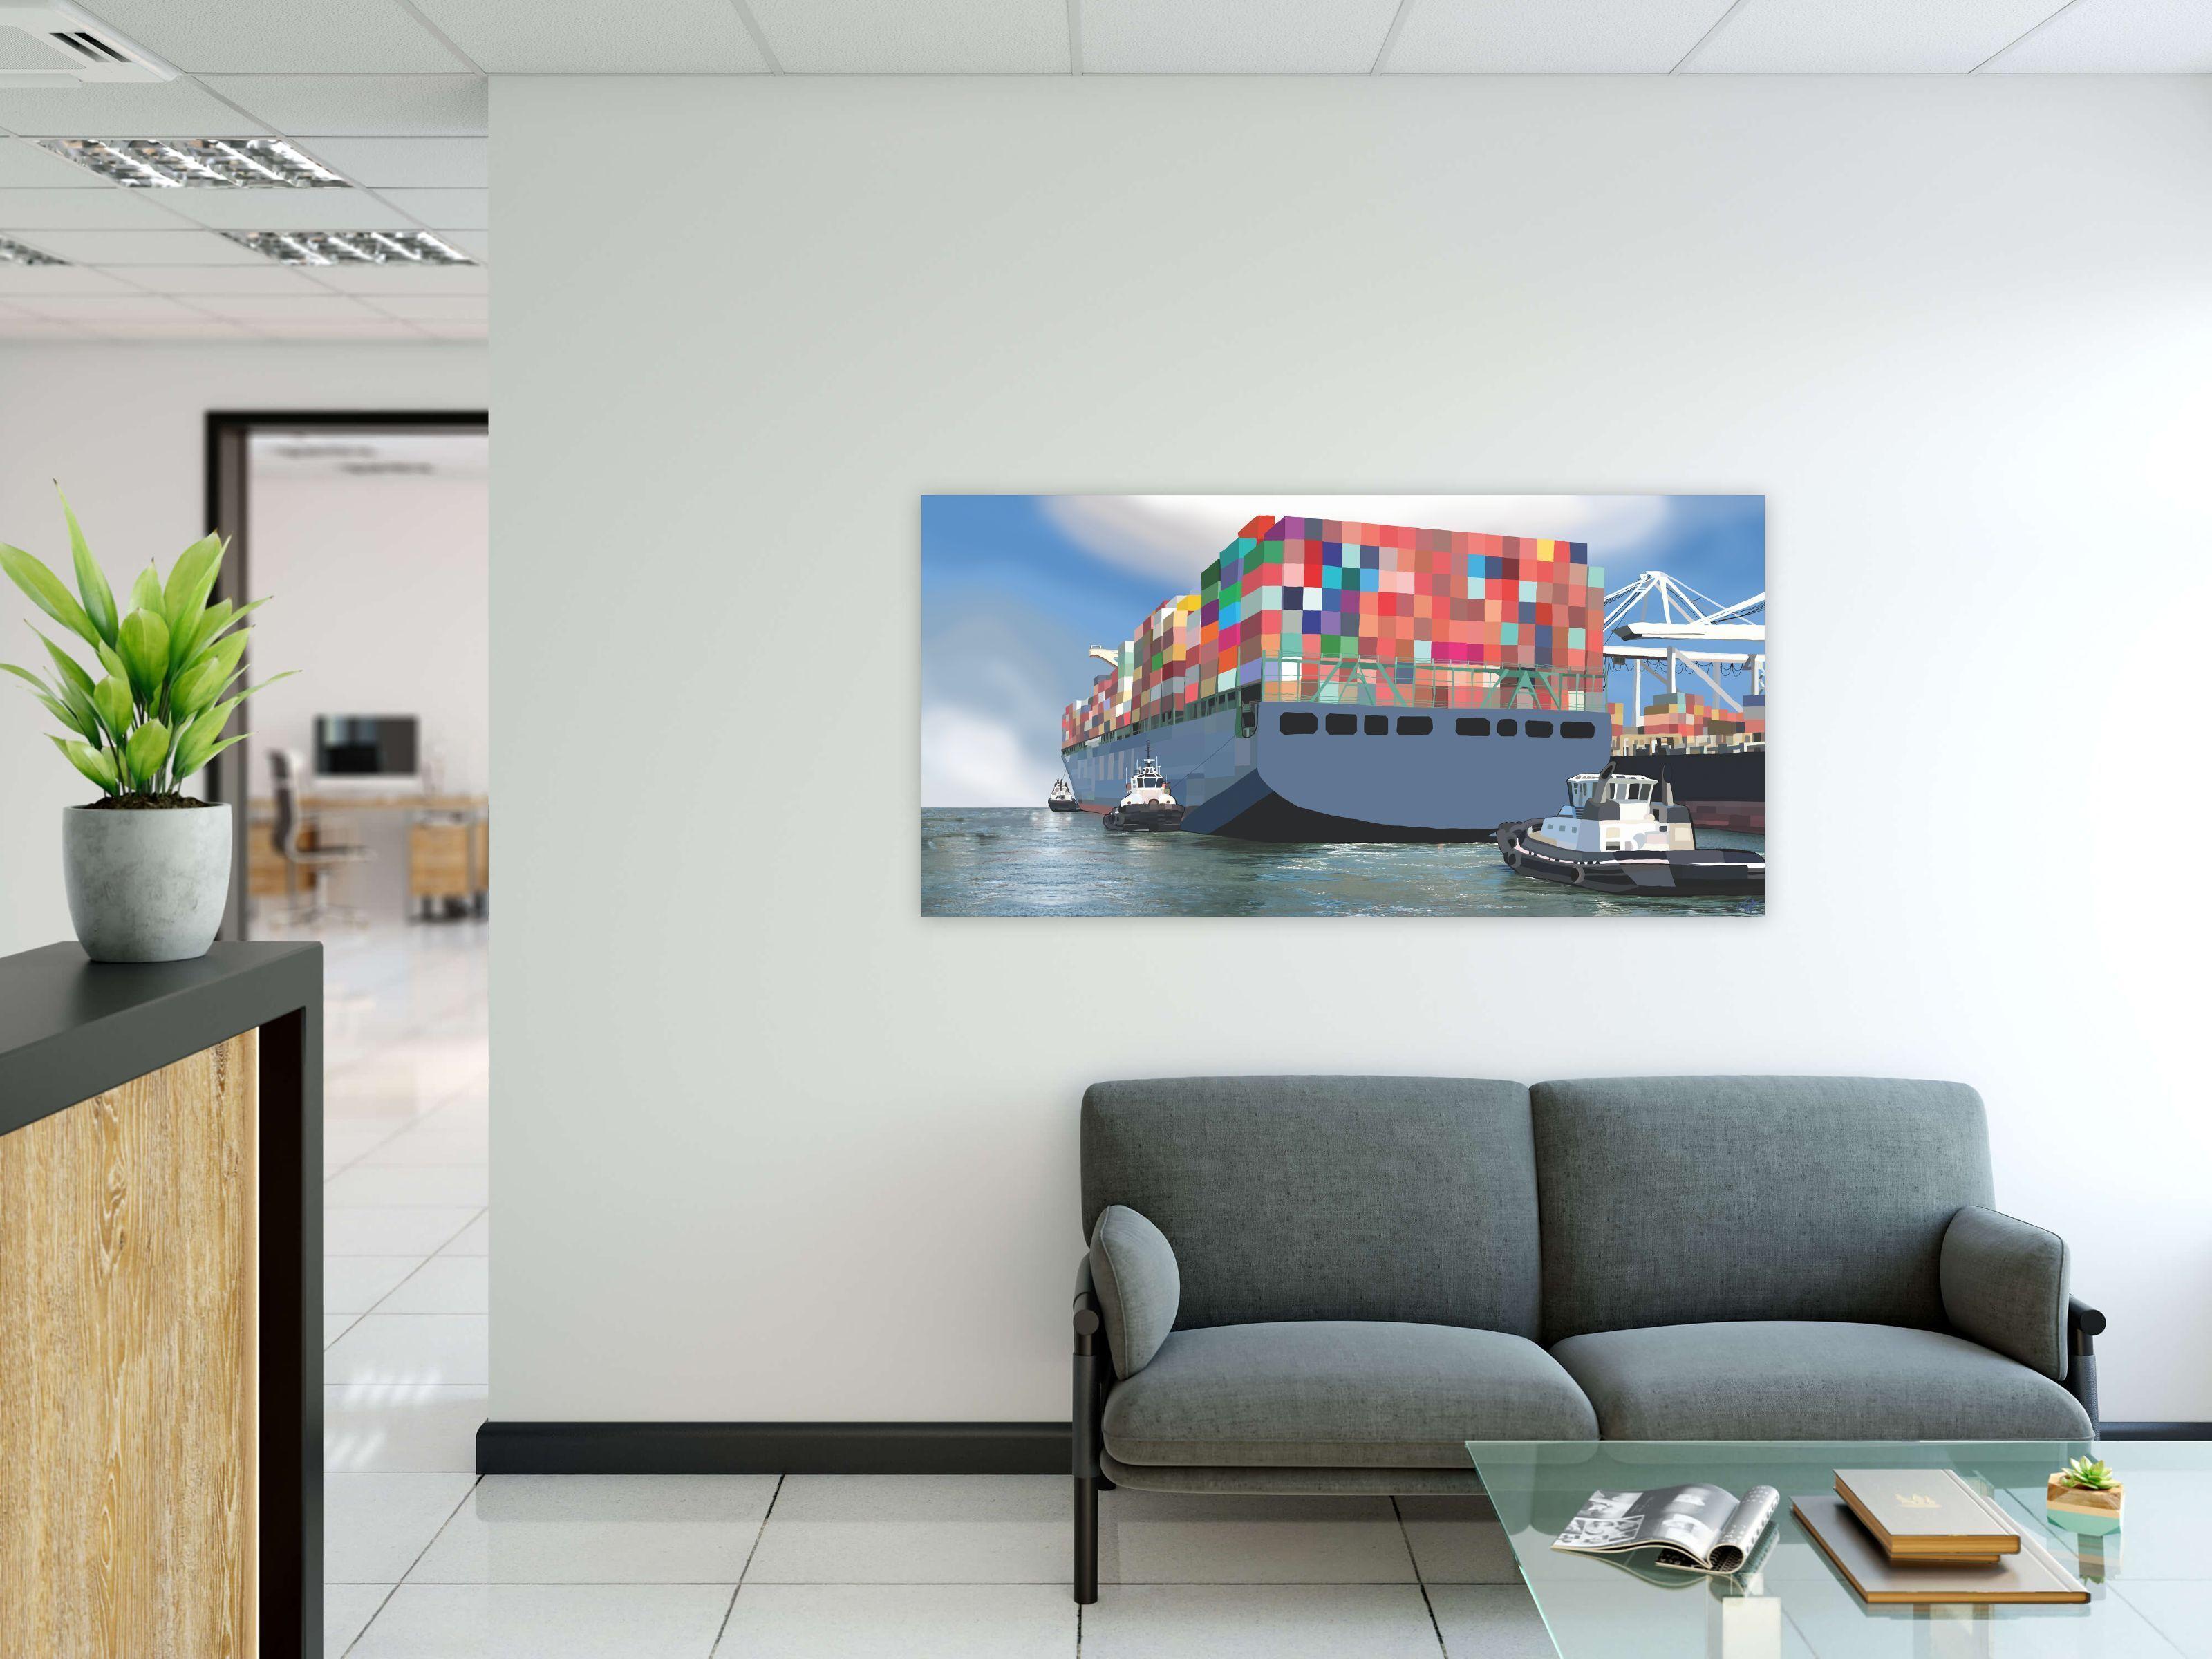 This large limited edition modern landscape painting of a Cargo Ship in Oakland, California is a bold vivid work of contemporary art. The large-scale digital painting, dye-sublimated onto aluminum by Coloradan artist Topher Straus, takes an original